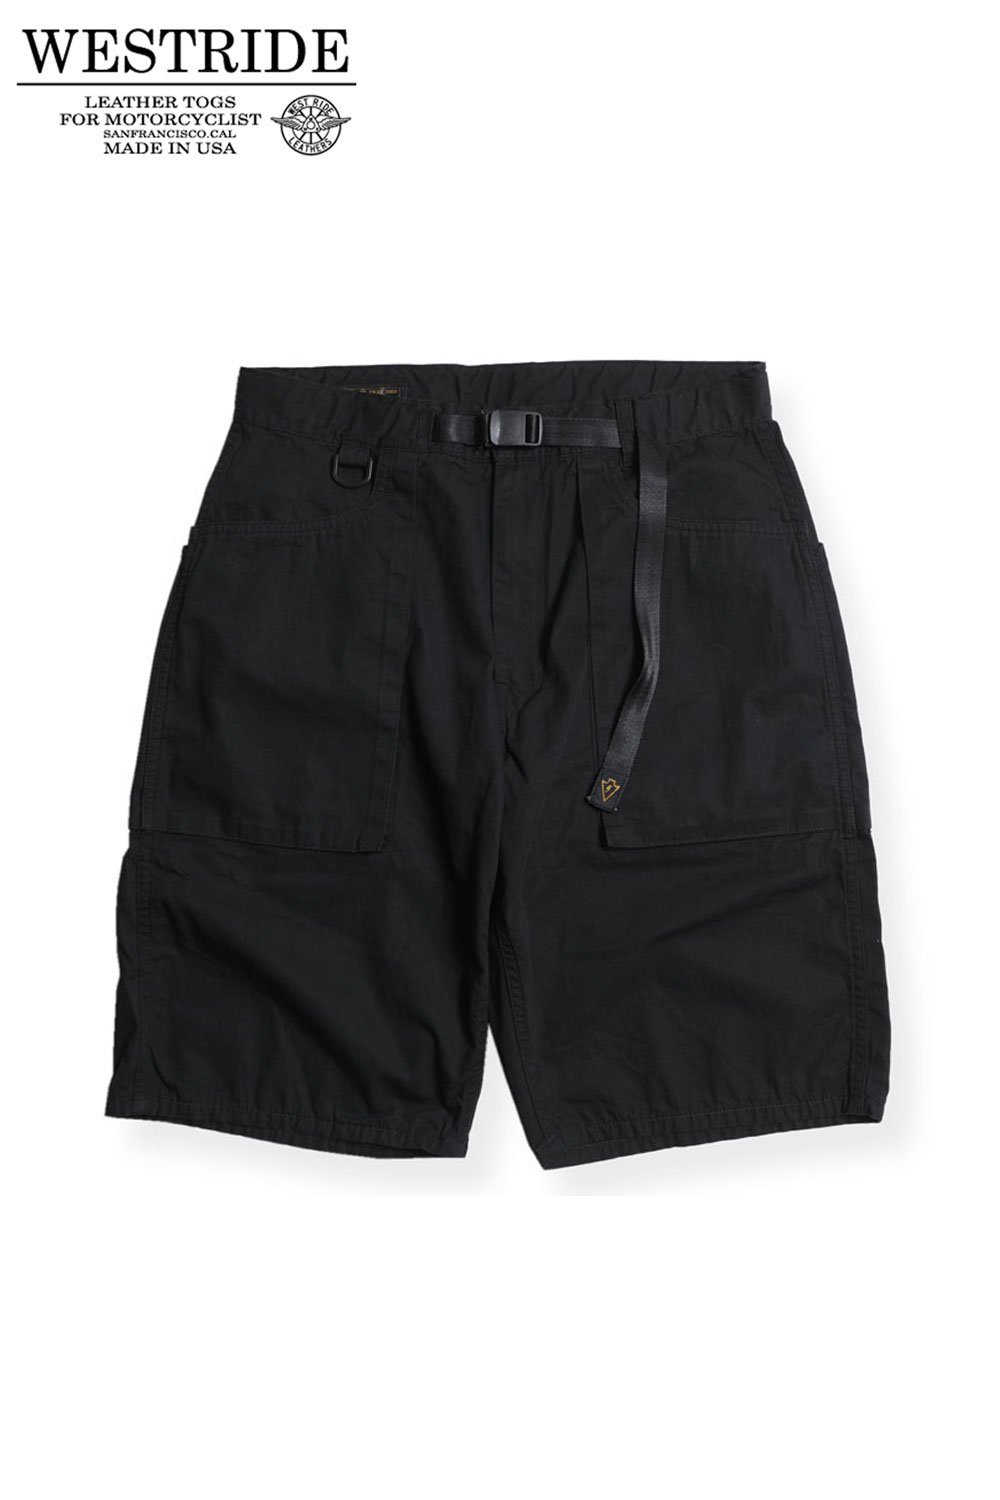 WESTRIDE(ウエストライド) ショートパンツ NEW STAND UP SHORTS MBS2408S 通販正規取扱 |  ハーレムストア公式通販サイト